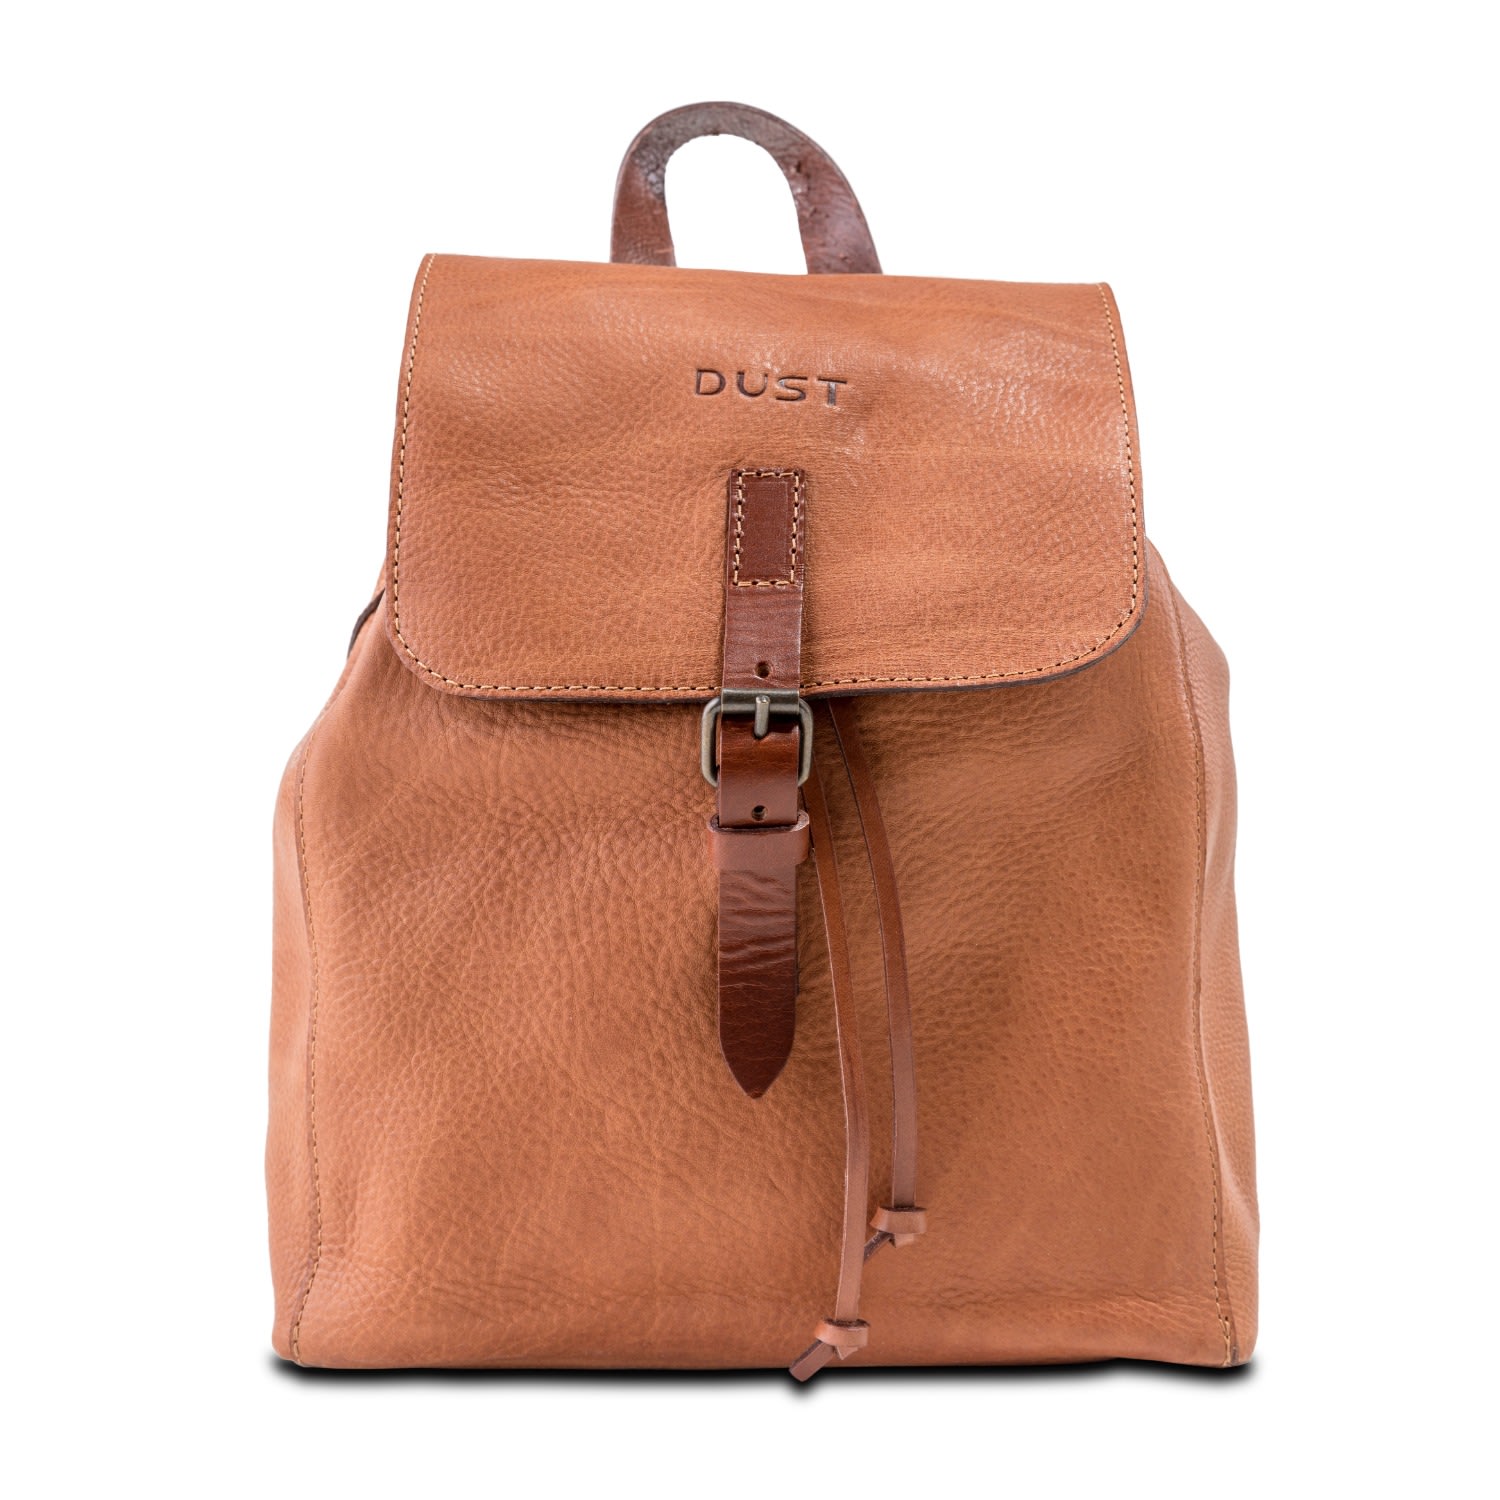 The Dust Company Women's Leather Backpack Arizona Brown